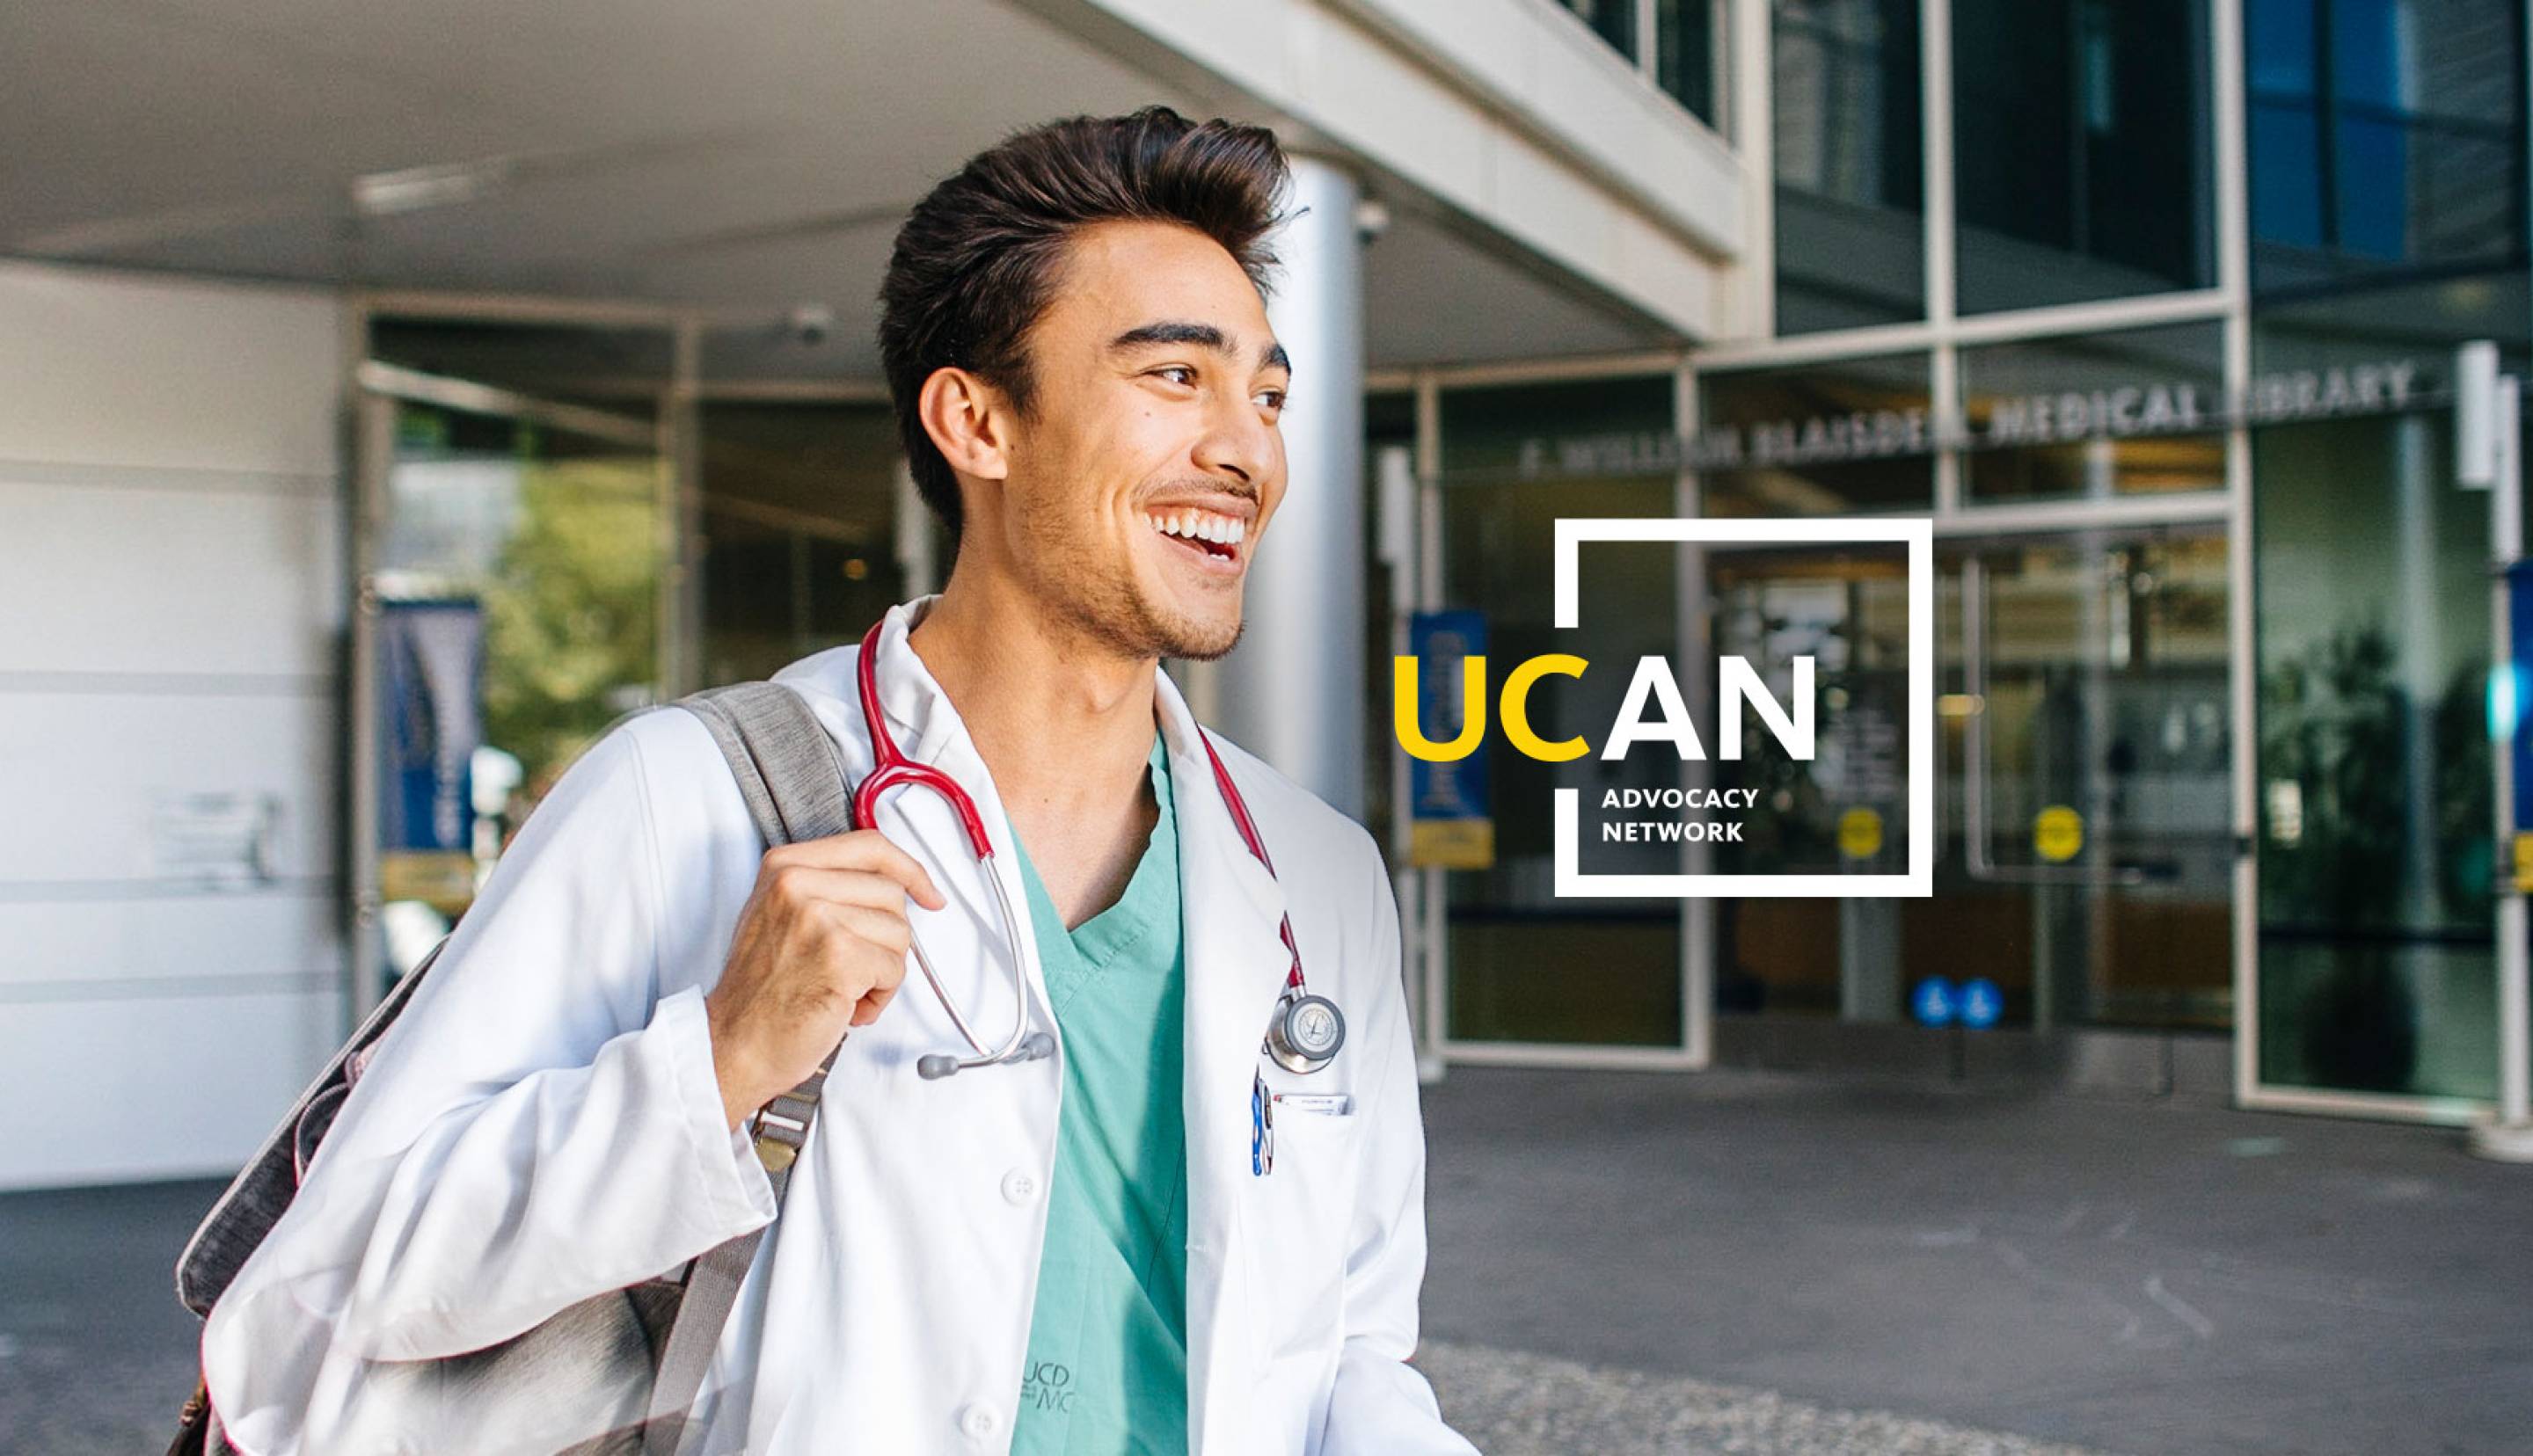 Medical student on campus with the UC Advocacy Network logo.